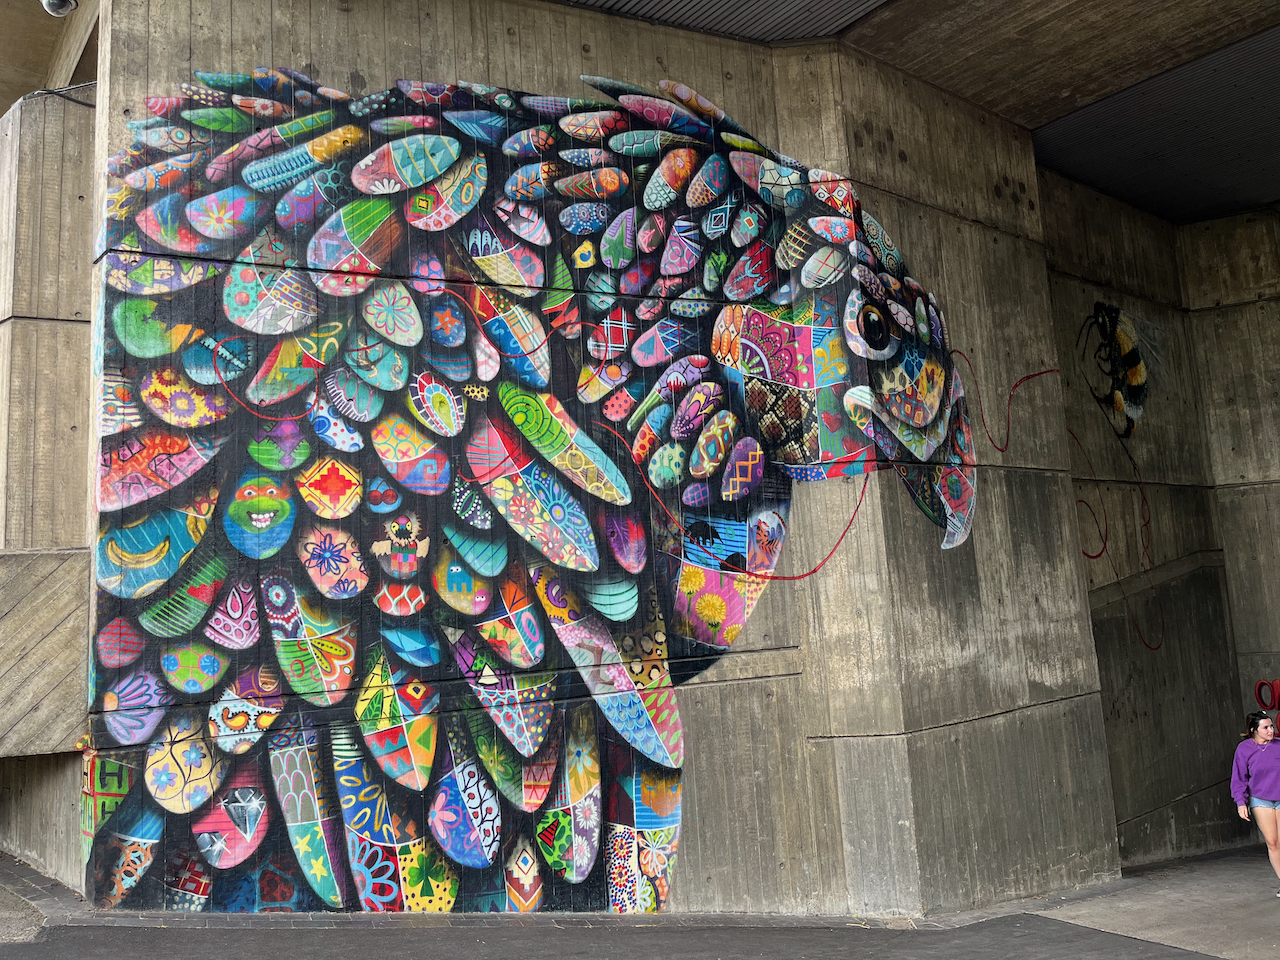 A large wall mural of a Philippine Eagle, made up of lots of different colourful patterned egg-shaped patches, one of which contains the face of a Teenage Mutant Ninja Turtle.